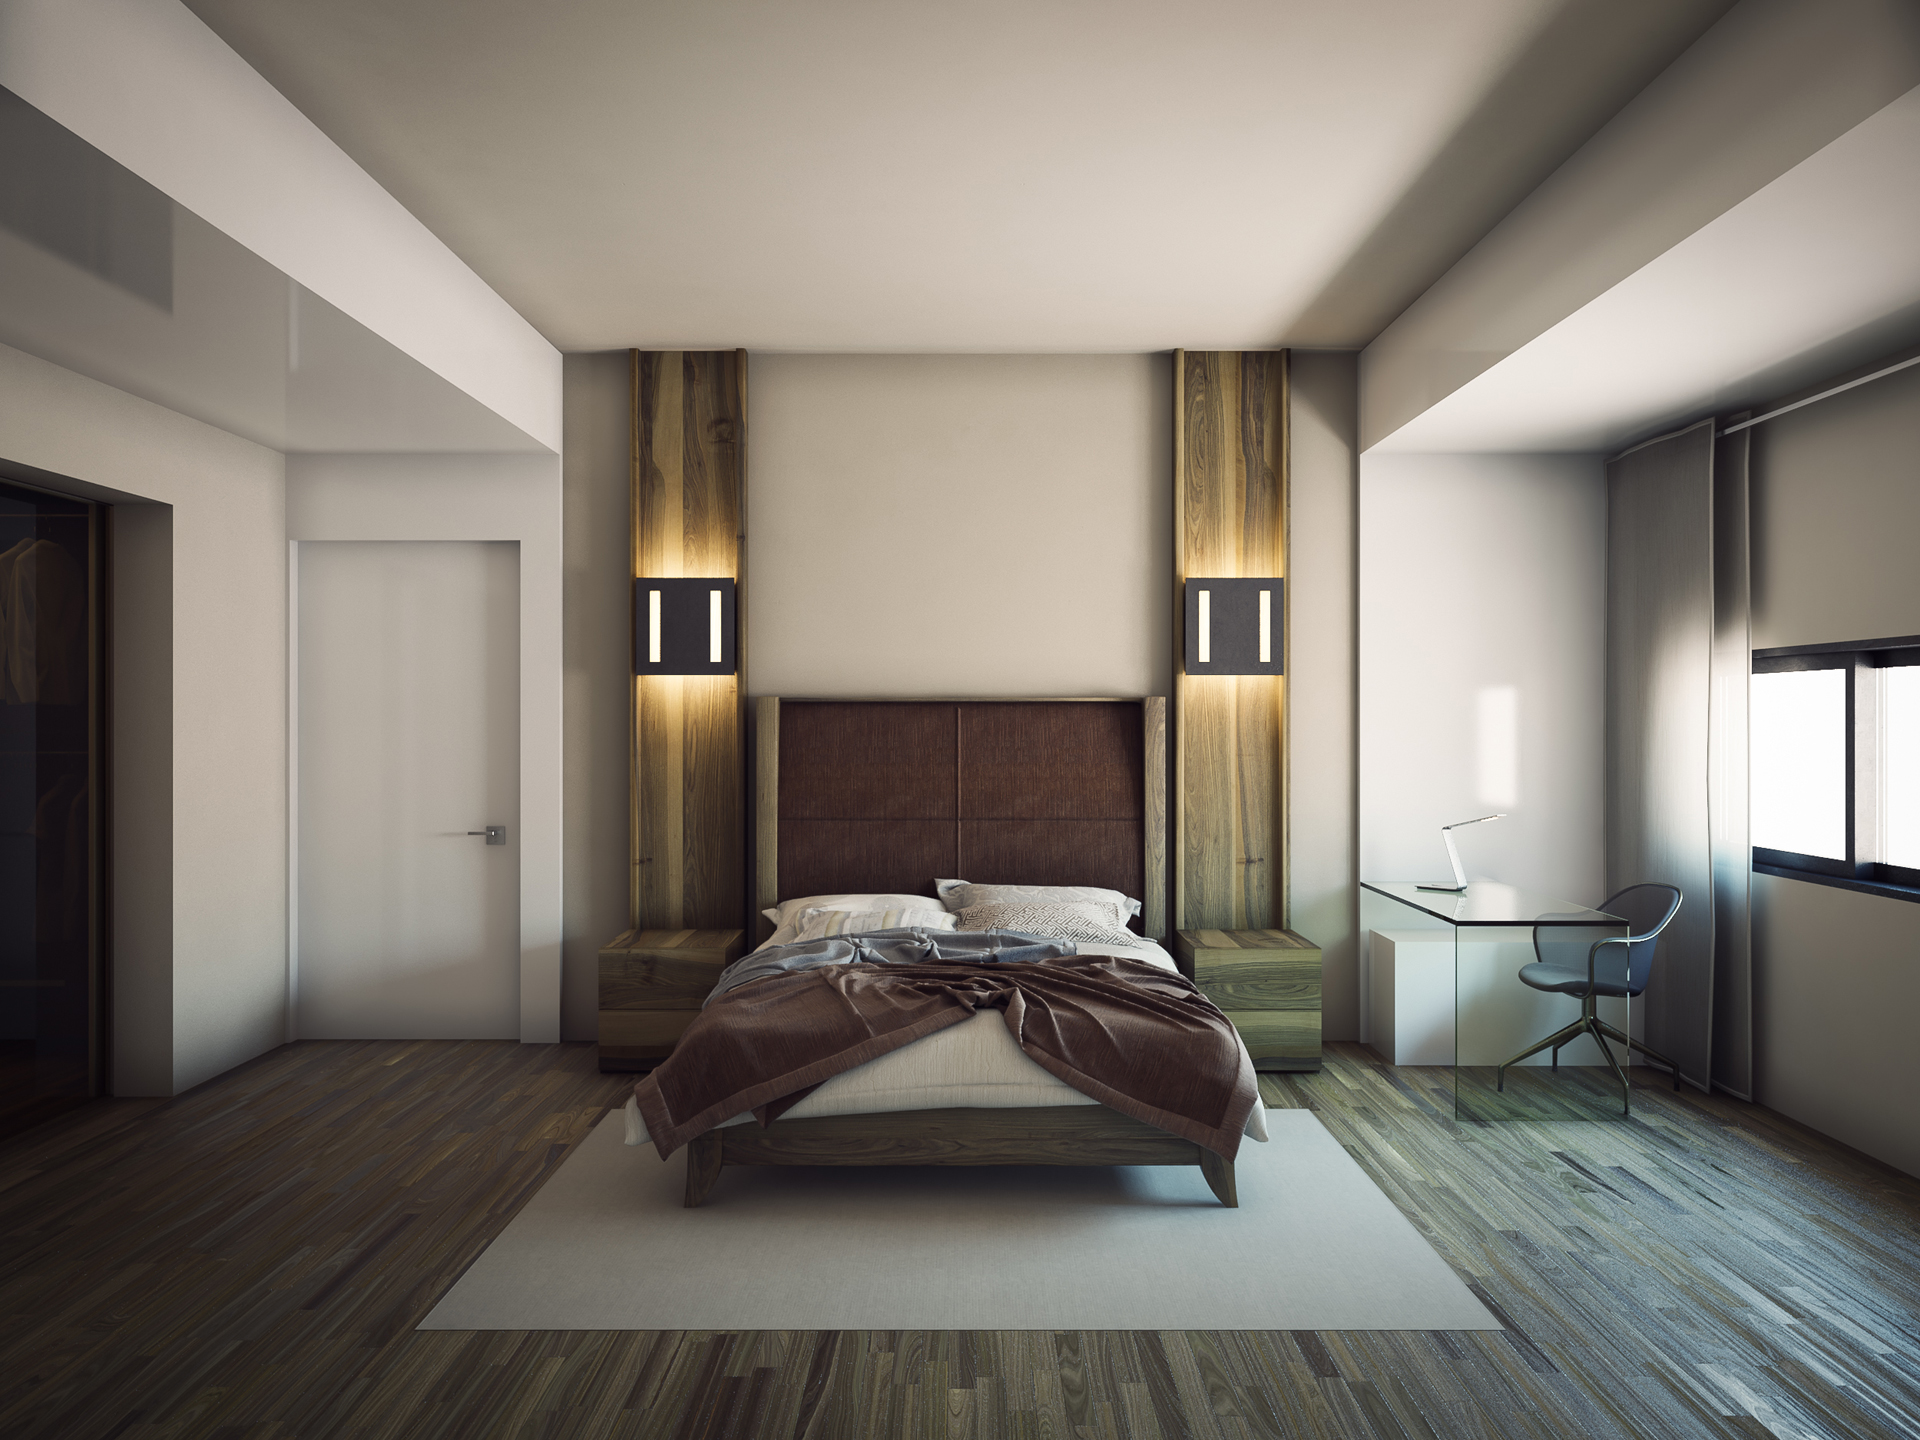 Bedroom with wood